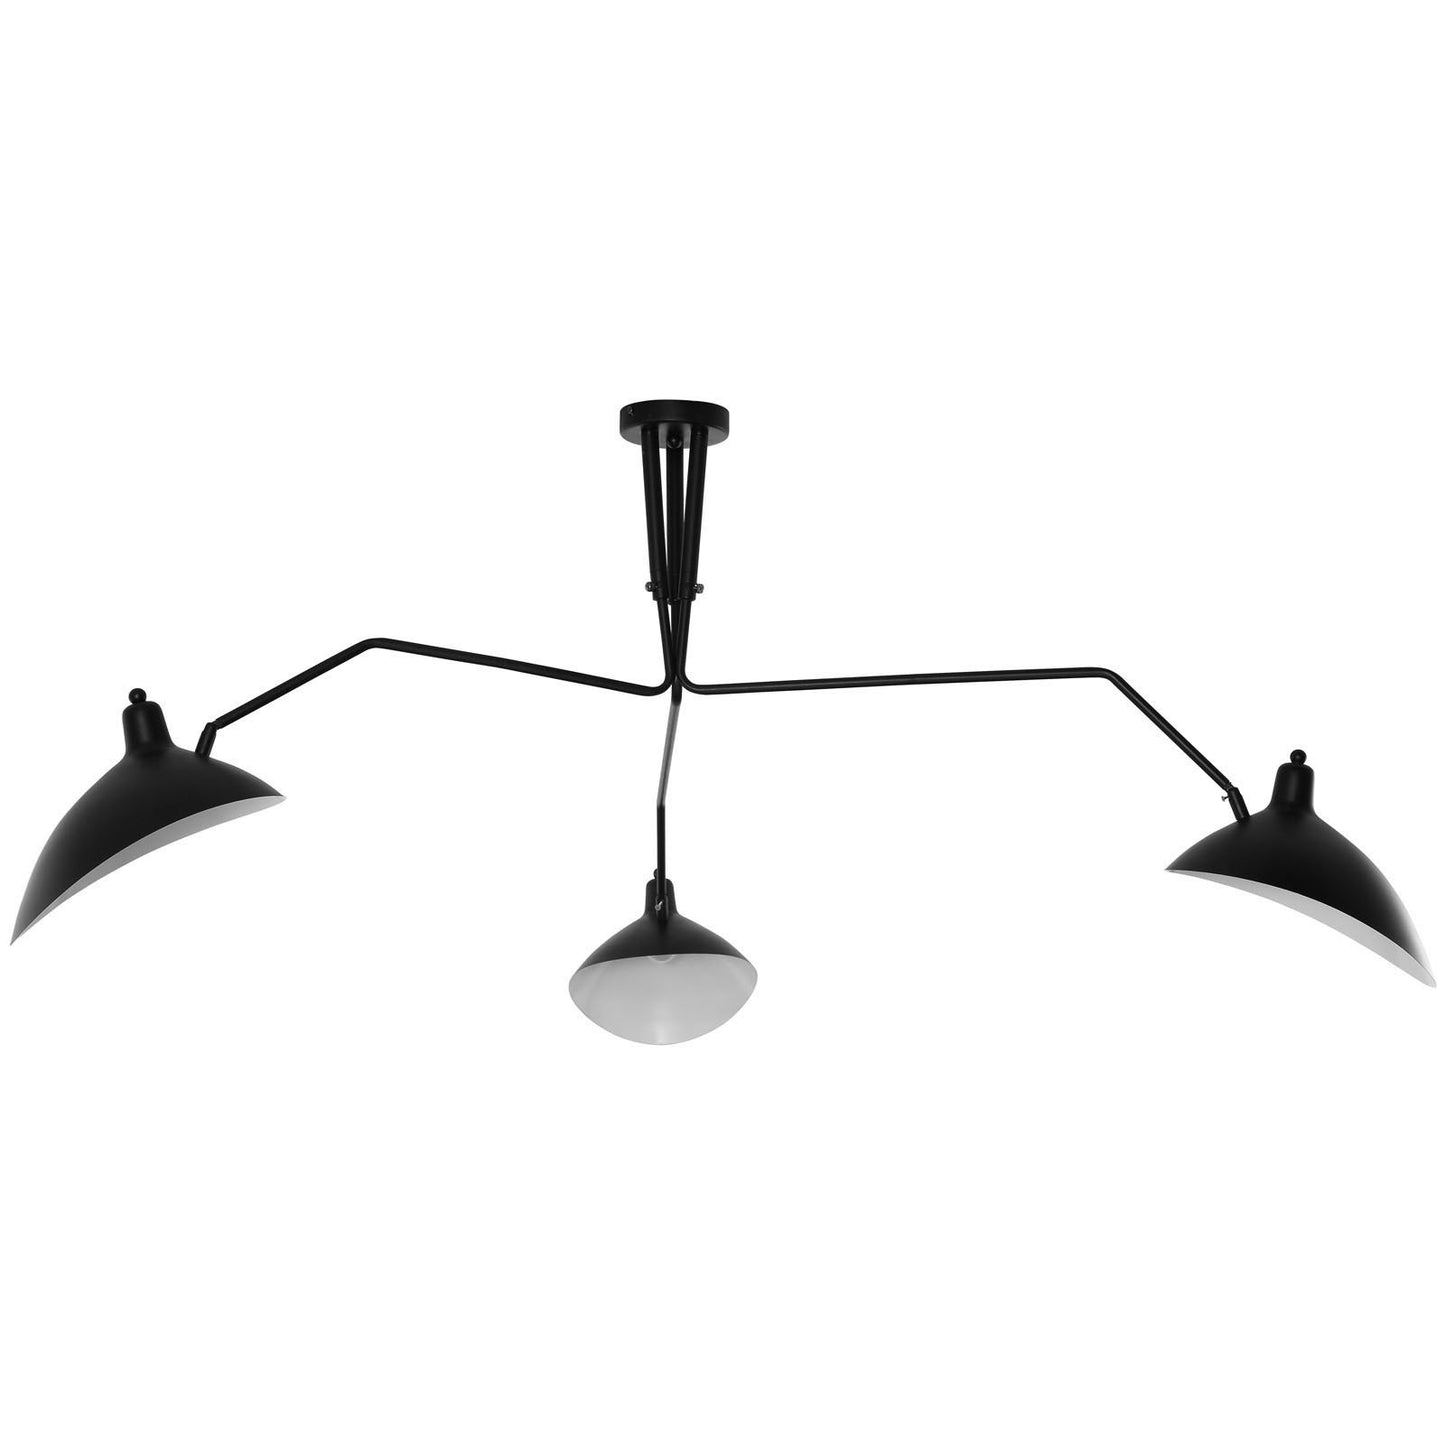 Serge Mouille Style Three Arm Spider Ceiling Fixture - living-essentials